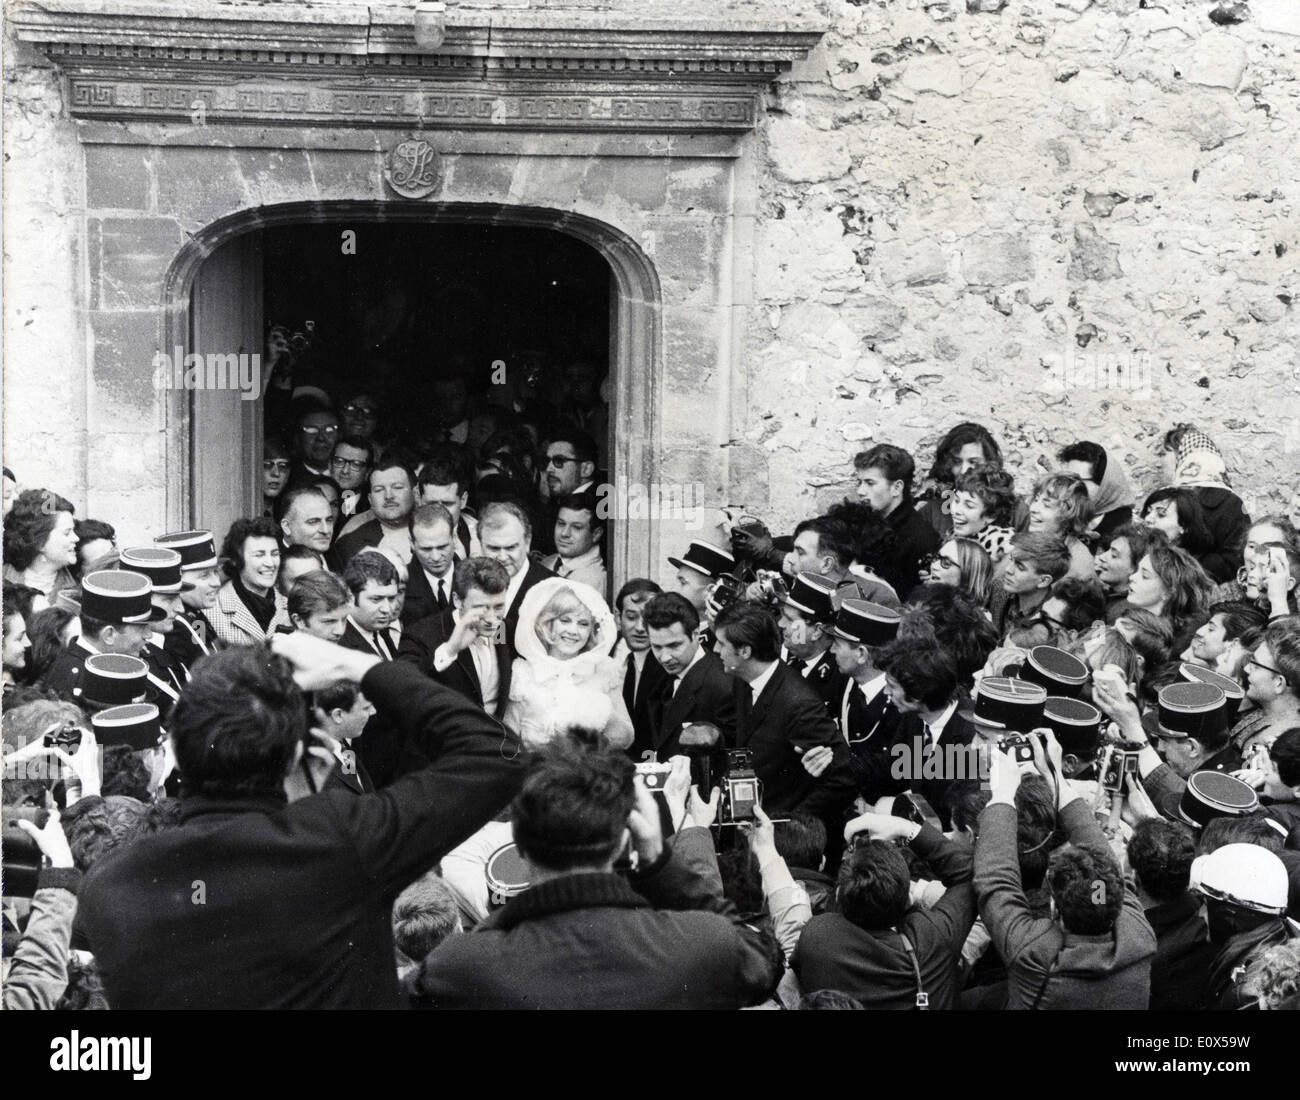 Apr 12, 1965 - Loconville, France - Newlyweds JOHNNY HALLYDAY and SYLVIE VARTAN leave the church they were married in while a massive crowd watches. Stock Photo